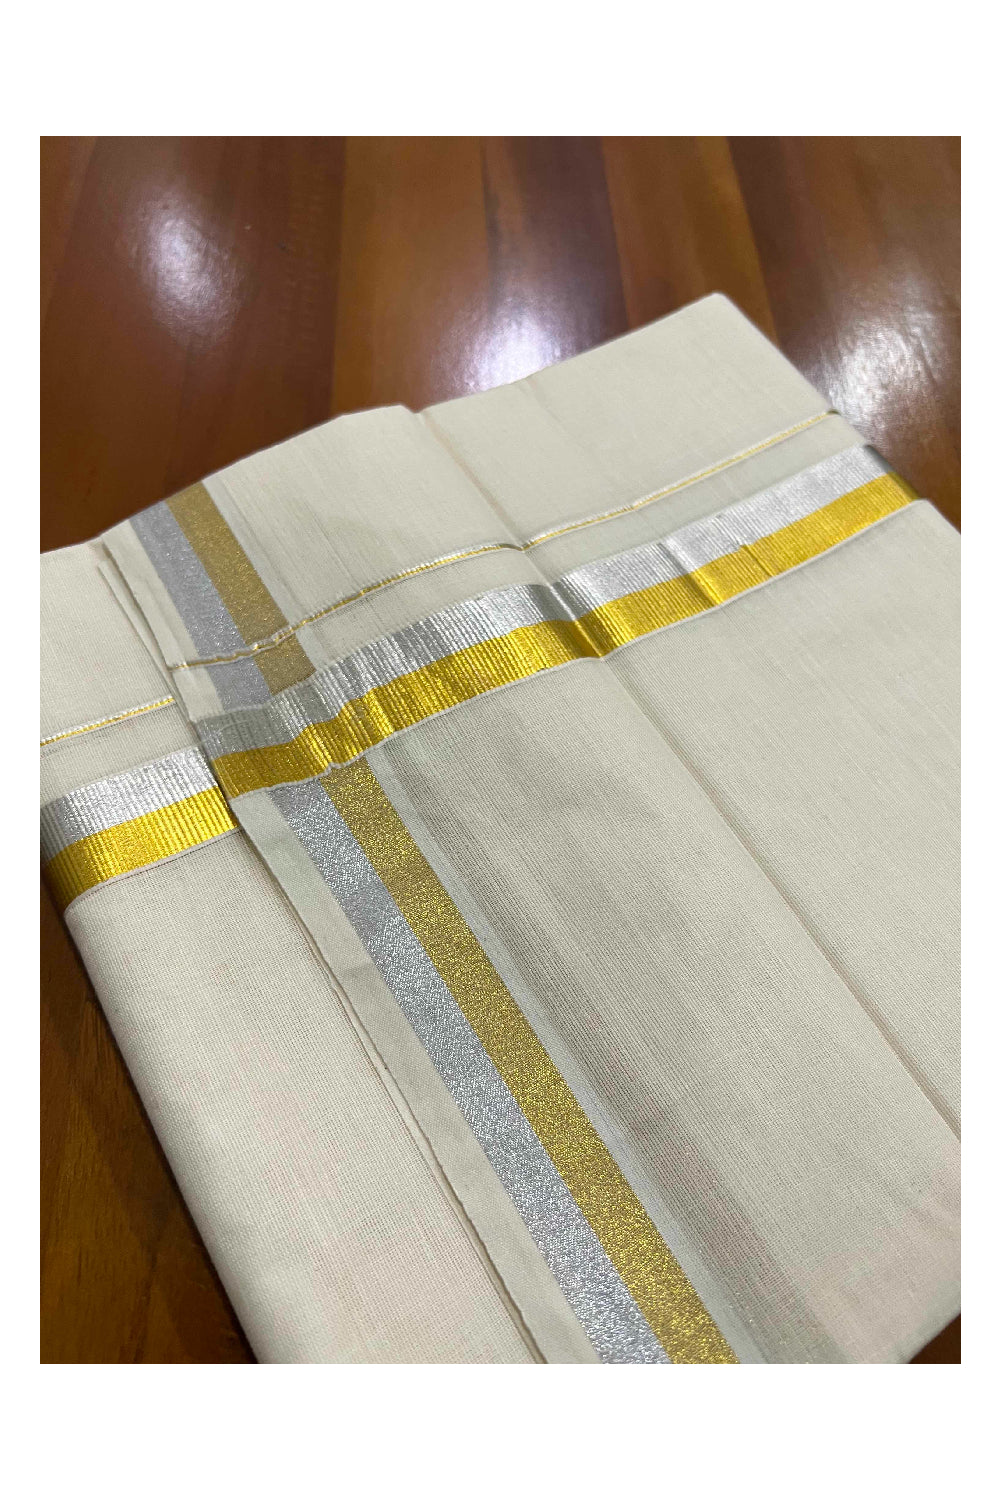 Off White Kerala Double Mundu with Silver and Golden Kasavu Border 1 inches (South Indian Kerala Dhoti)